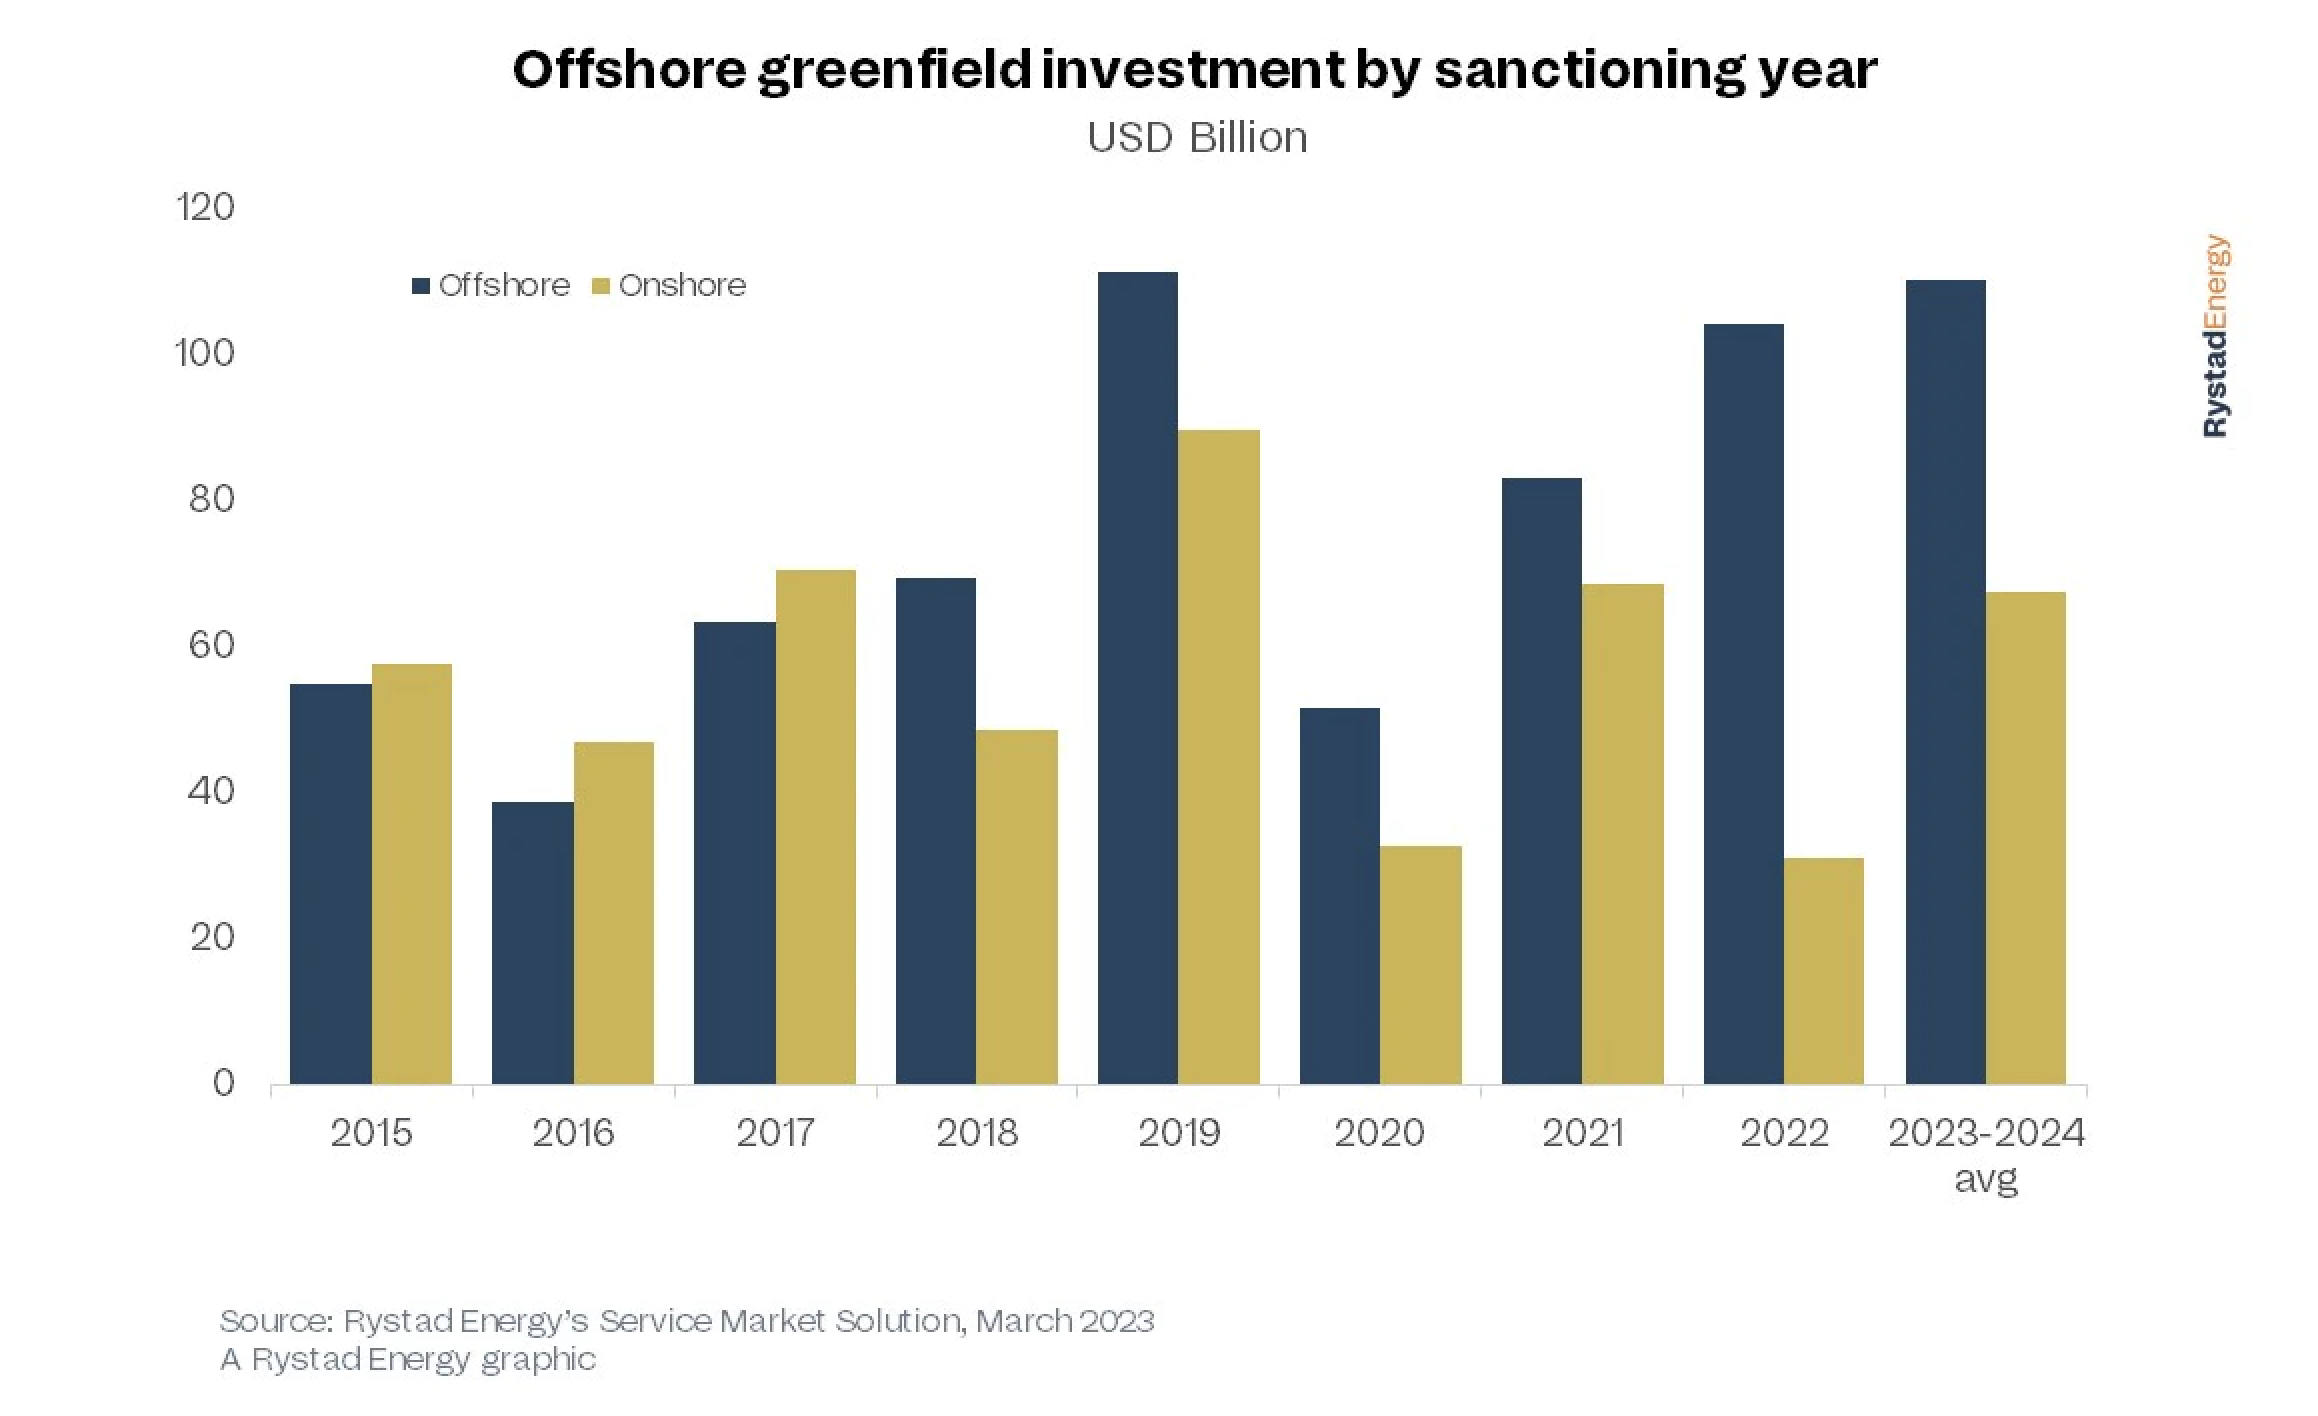 2 Offshore greenfield investment by sanctioning year